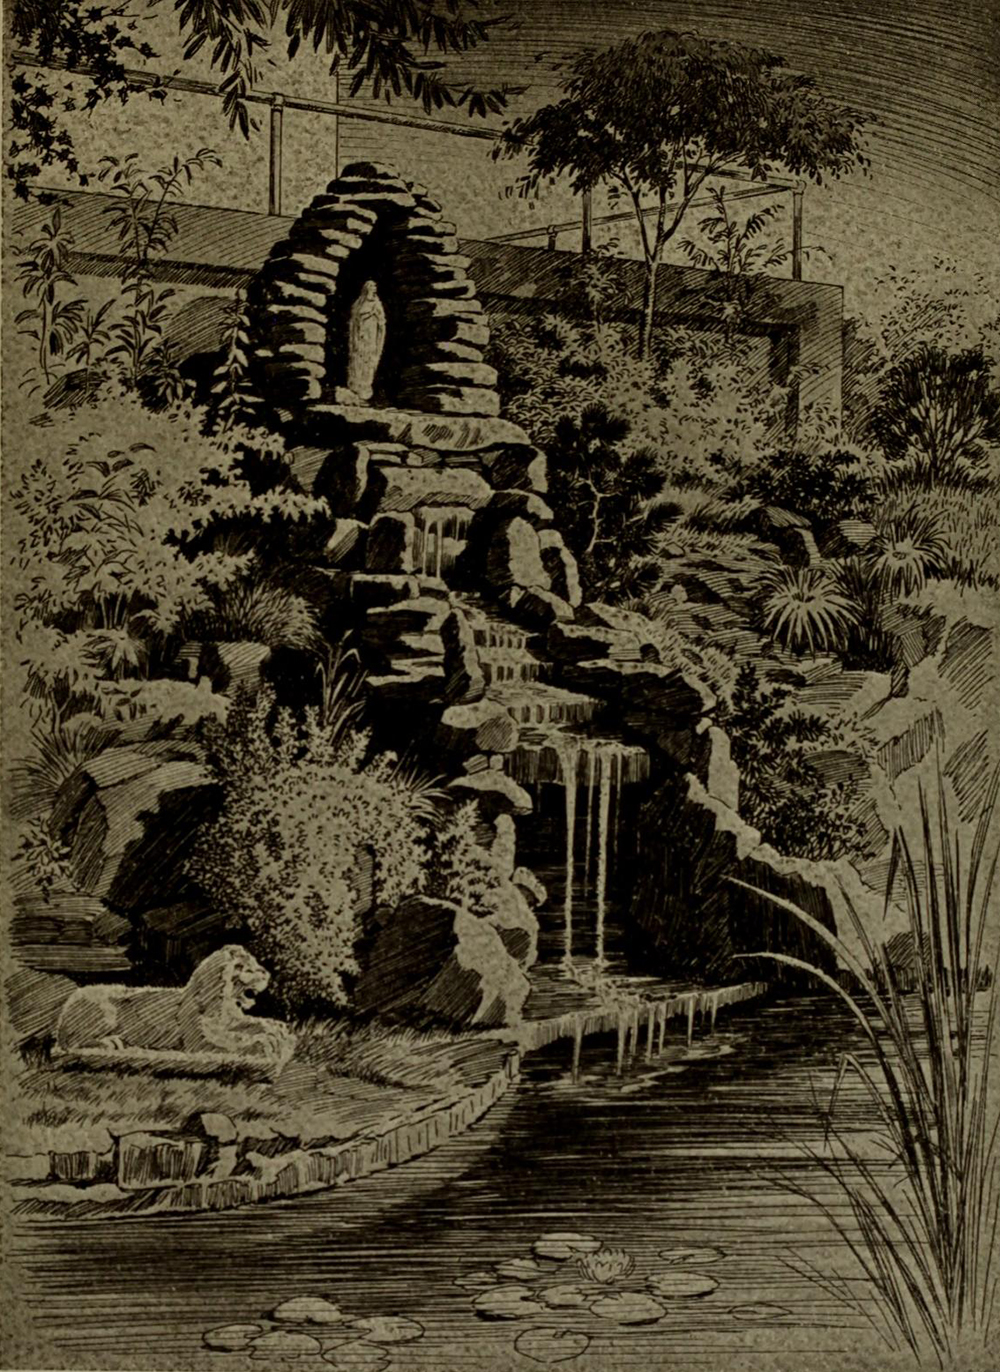 An illustration of the waterfall shrine.